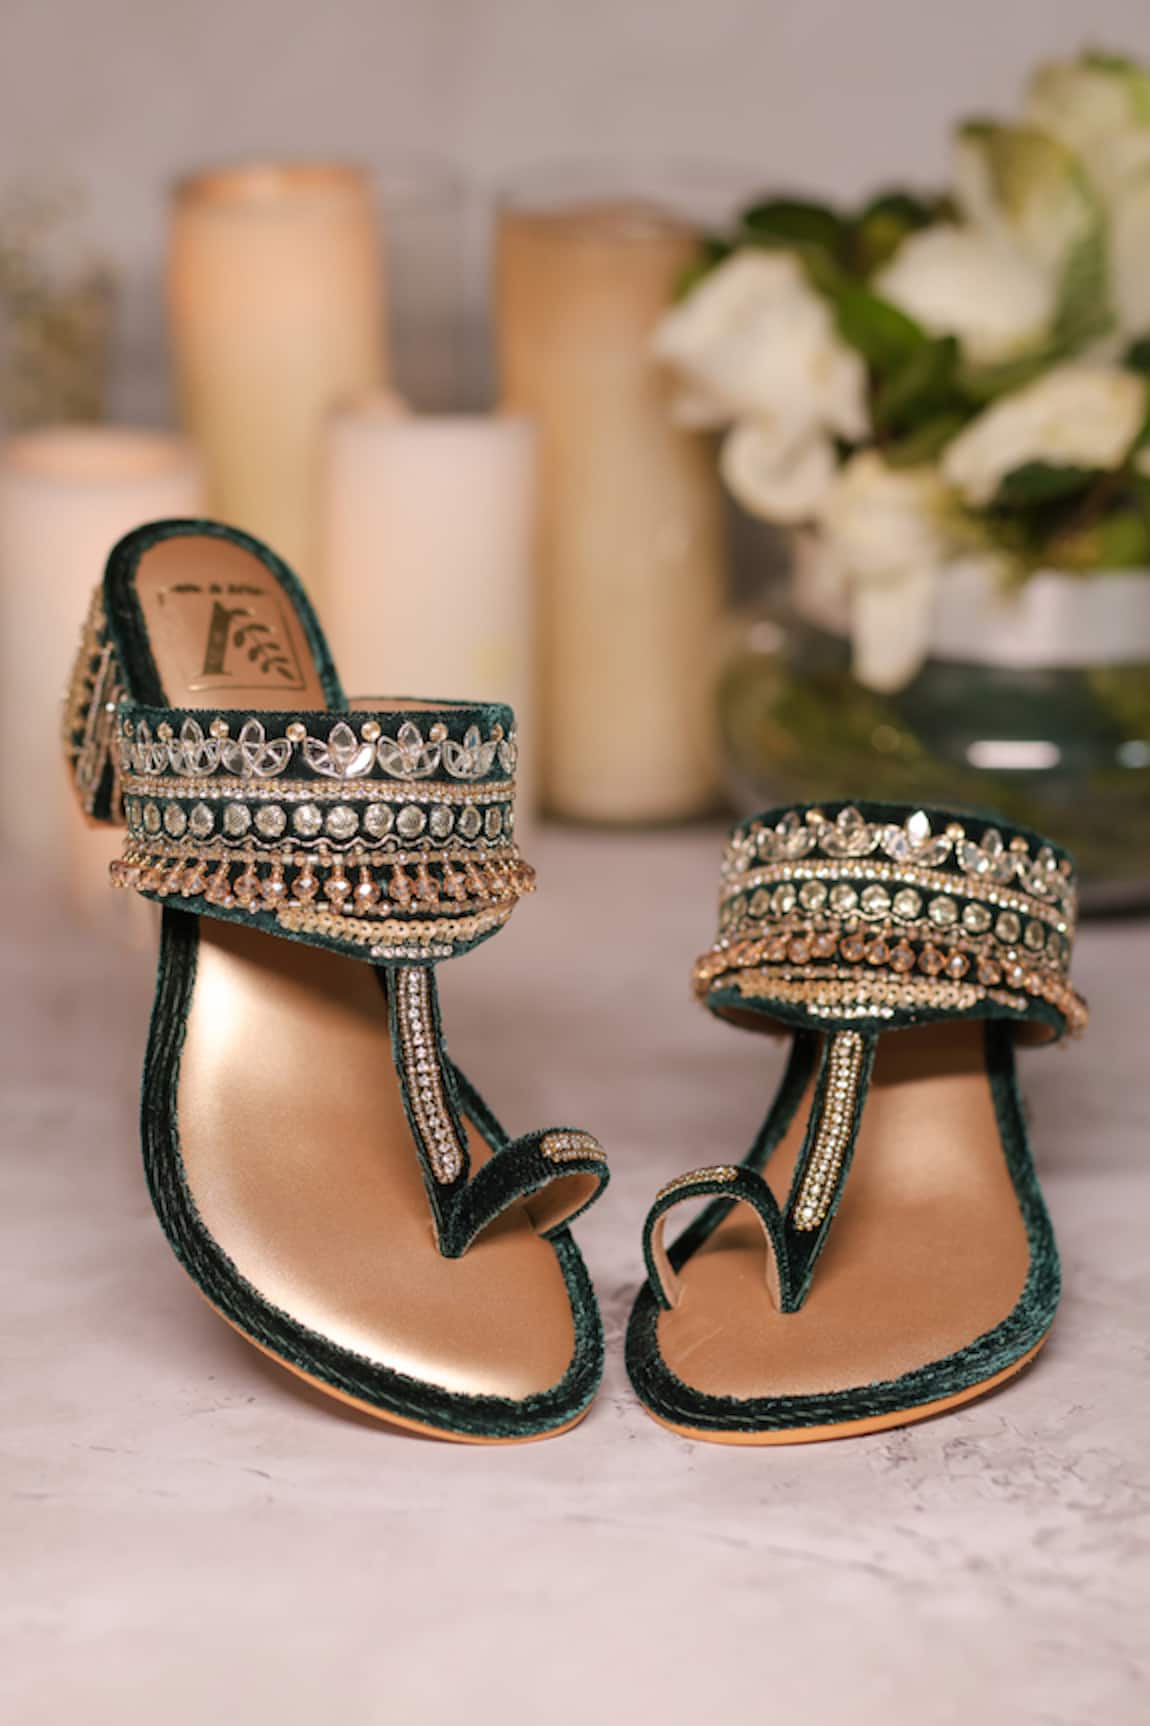 2023 Womens Designer Sandals: 14cm Flower Button High Heels In Black And  Gold From Feng2019, $82.77 | DHgate.Com